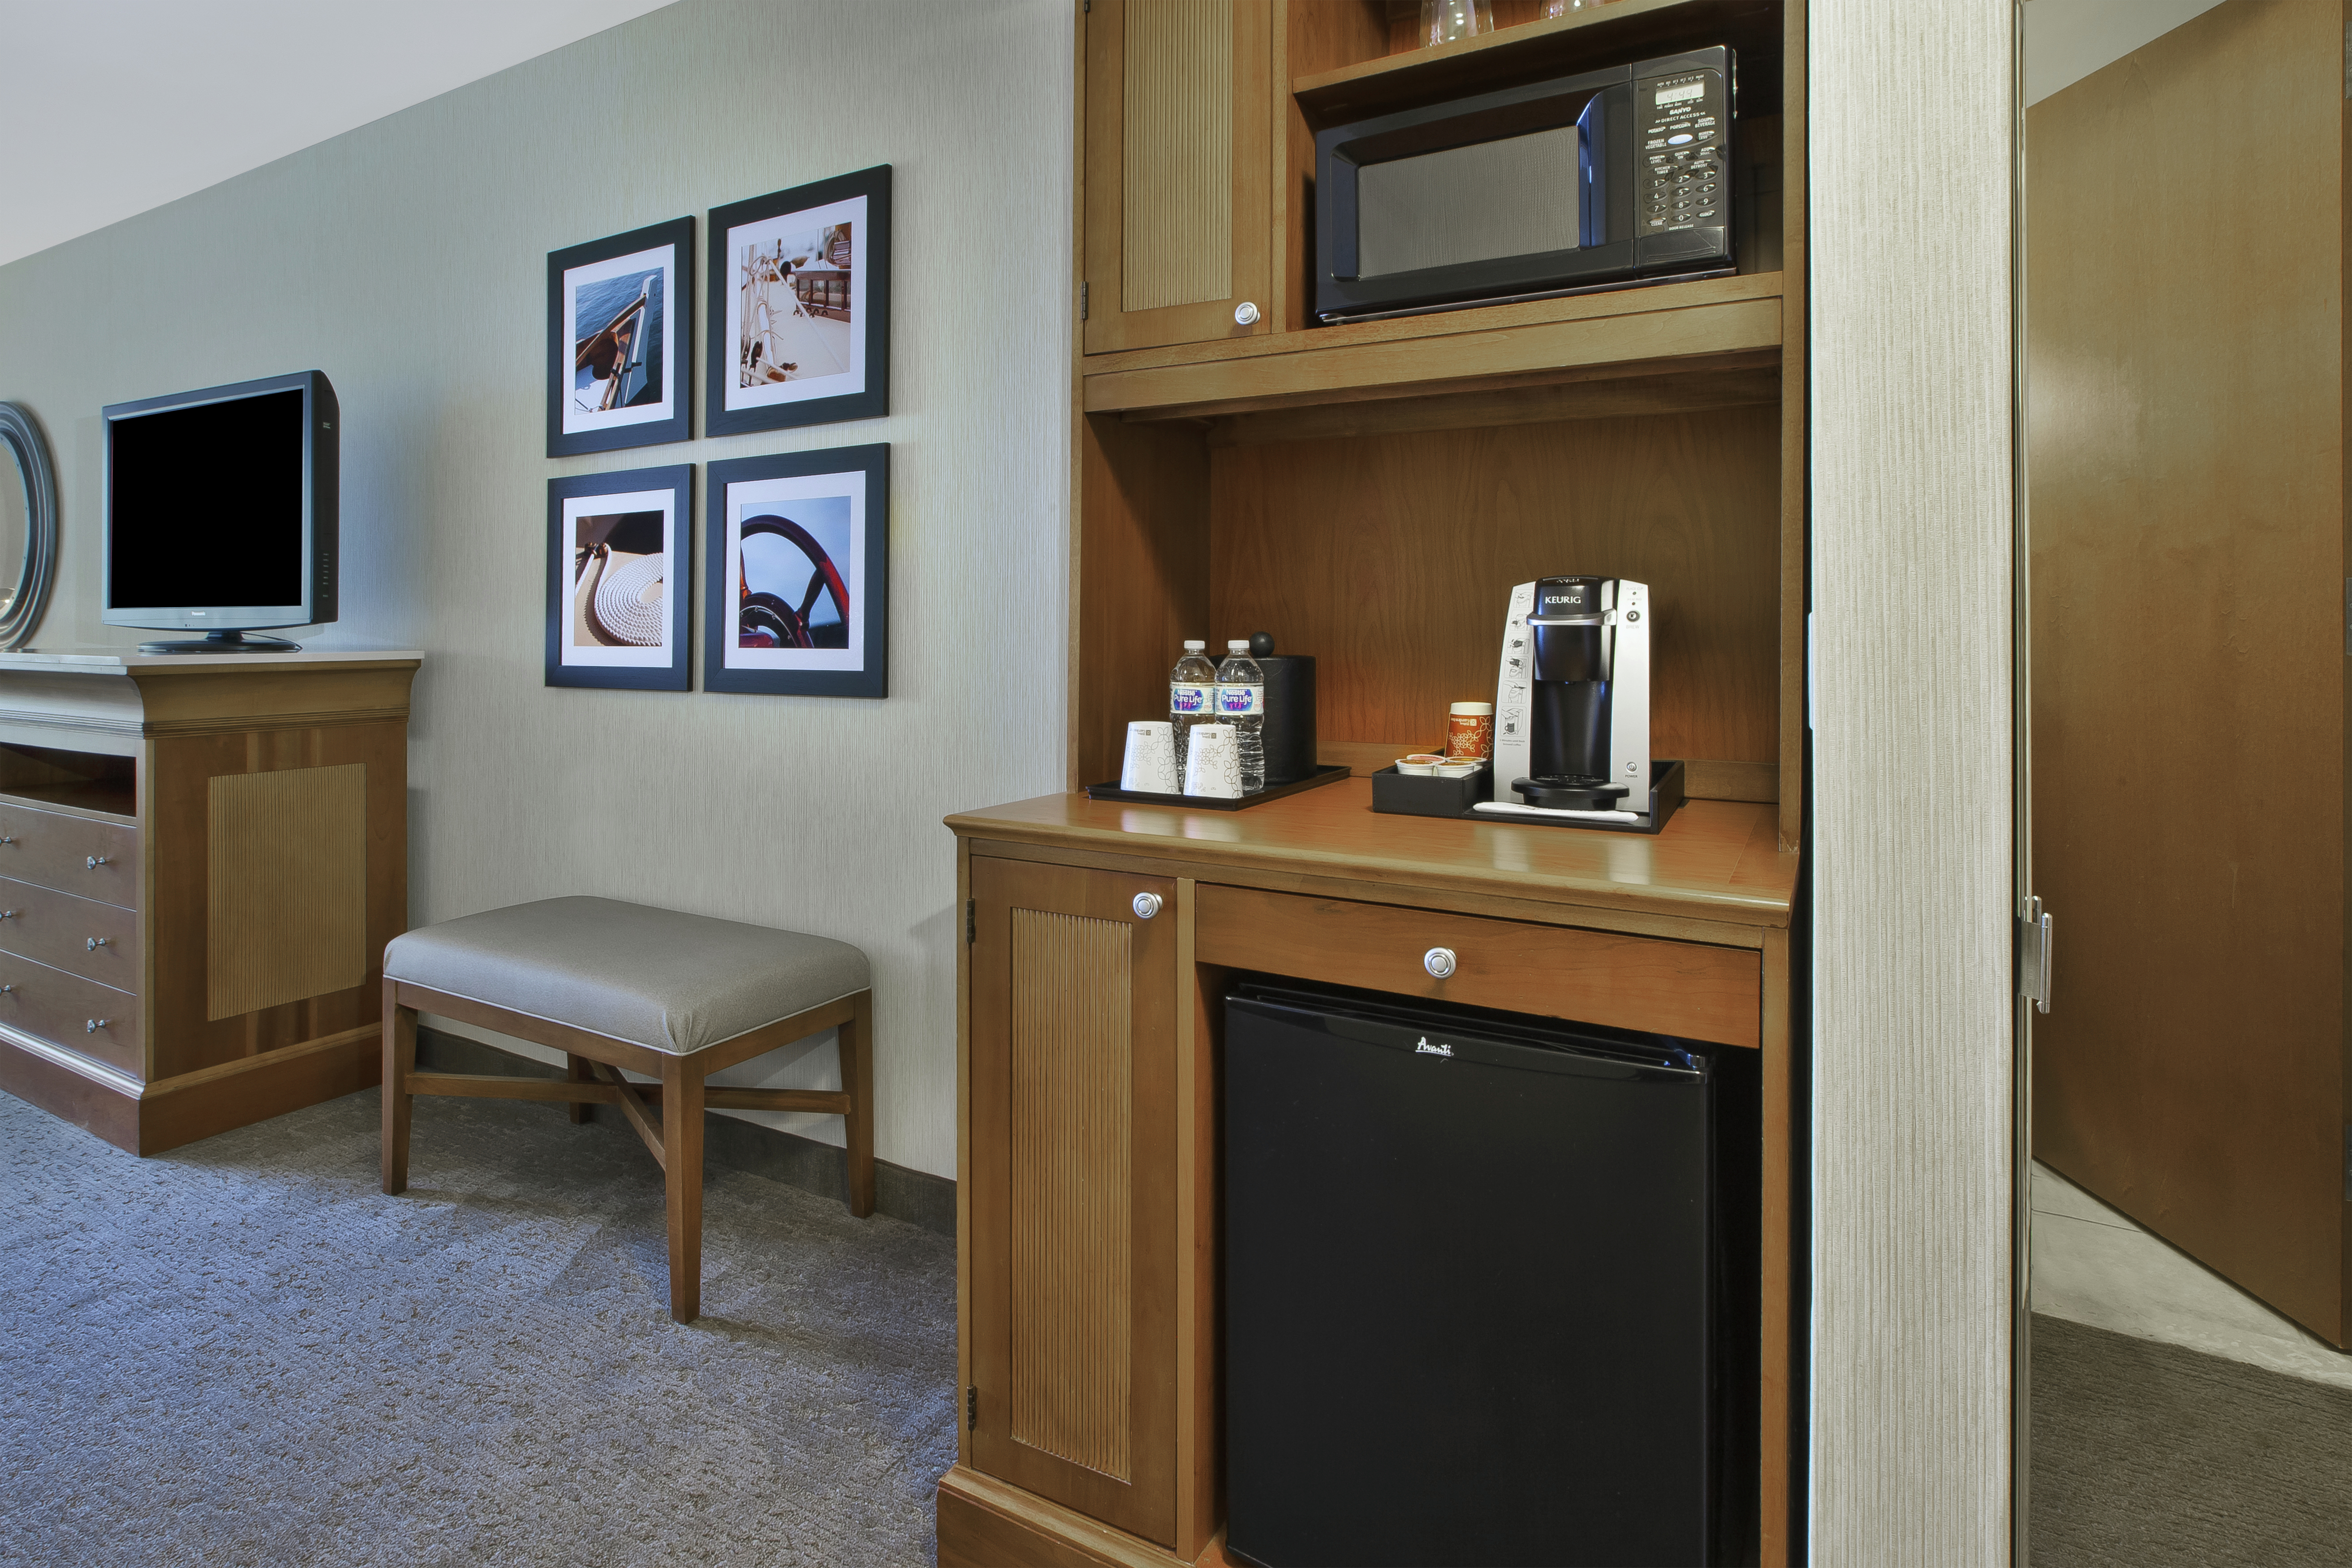 Hospitality center with refrigerator and coffeemaker